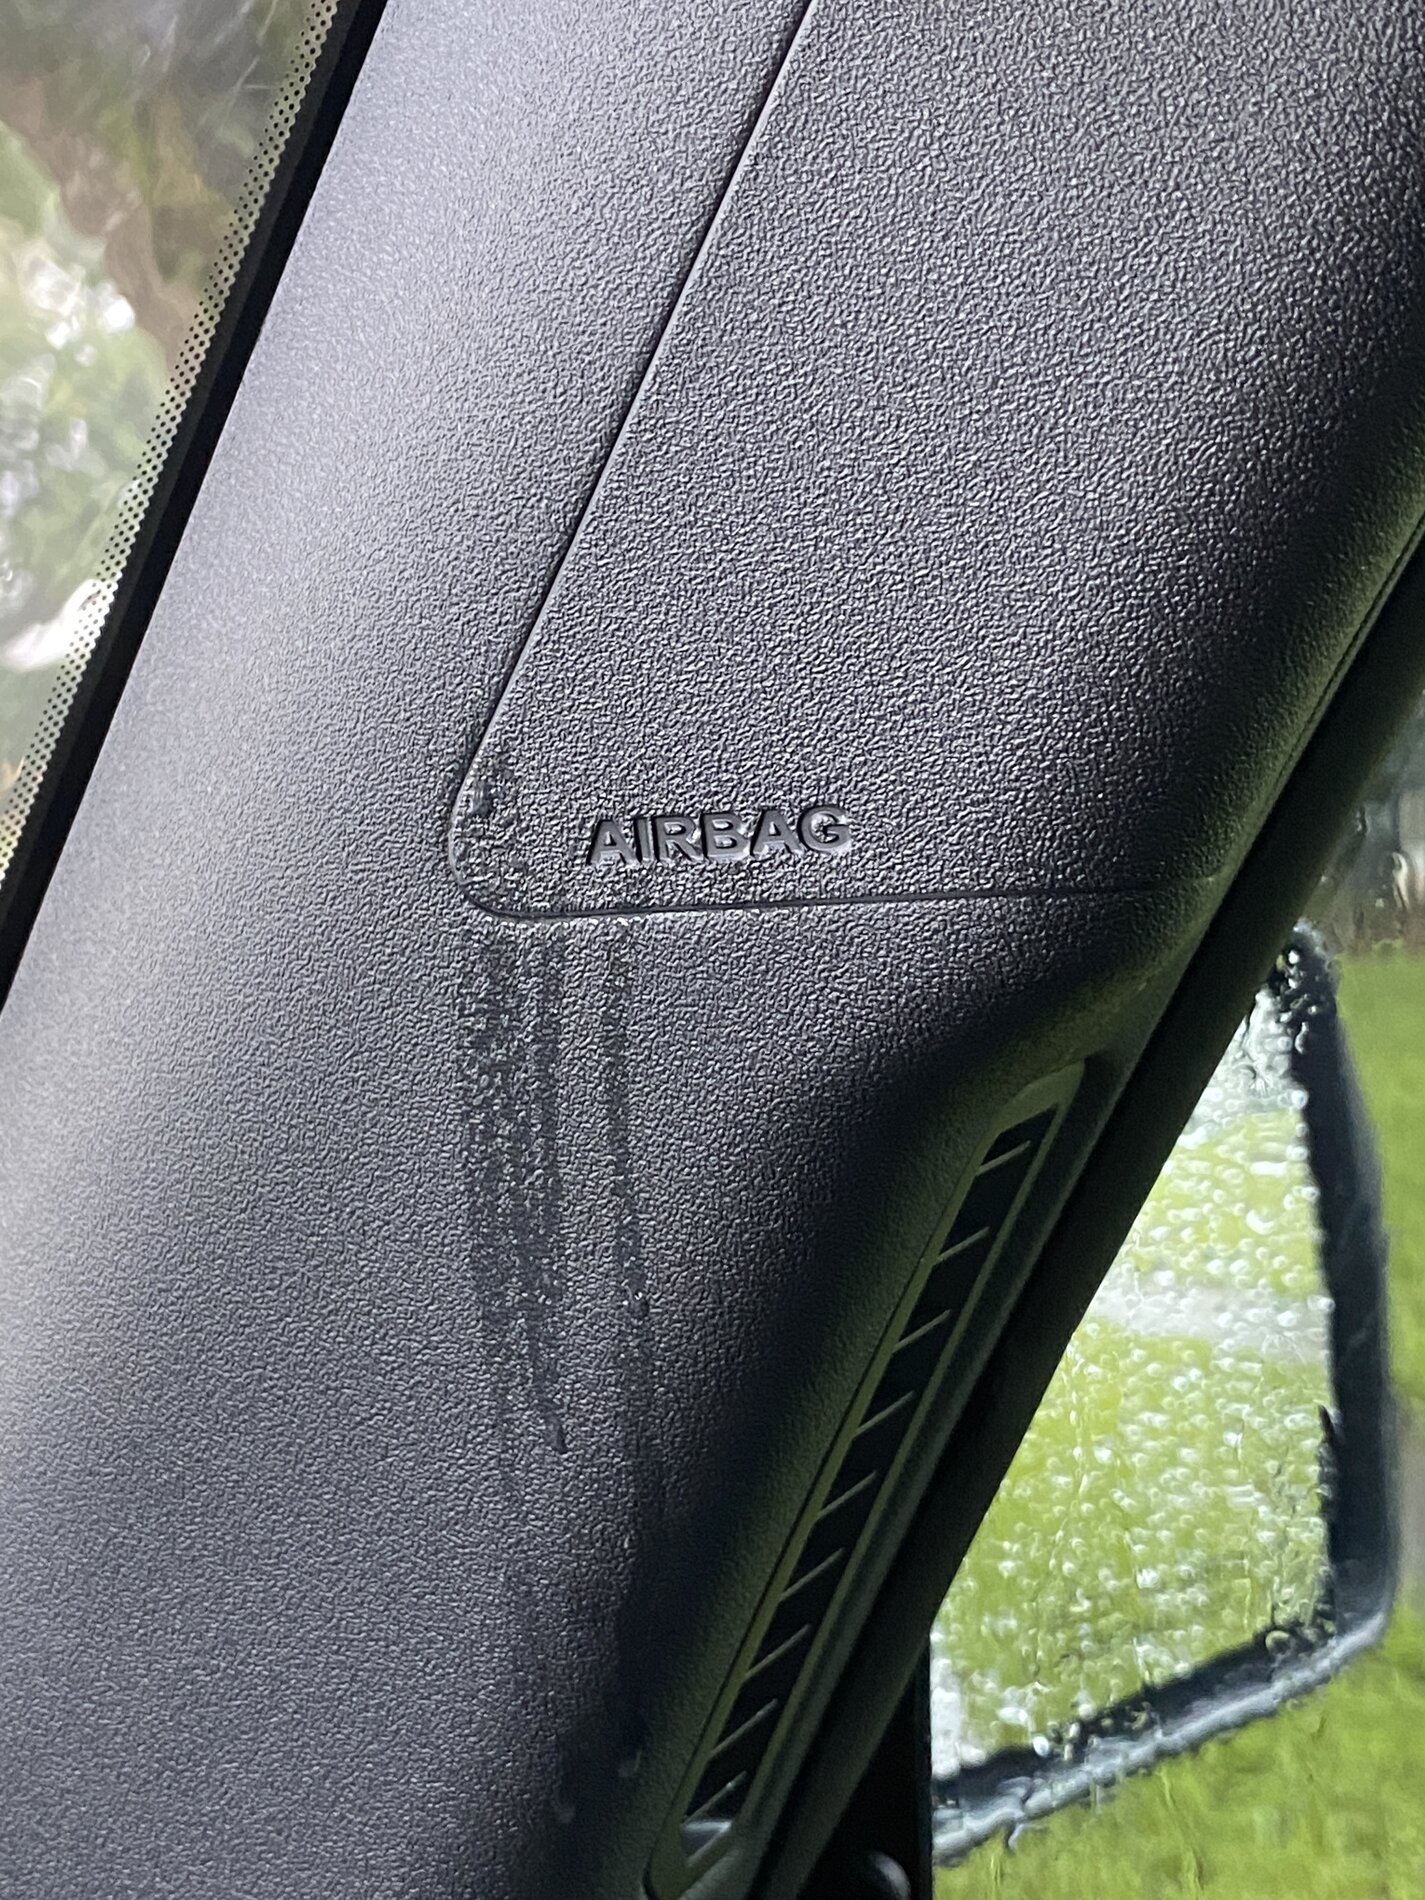 Ford Bronco Water leaking from A-pillar airbag cover in heavy rain oprah-free-car